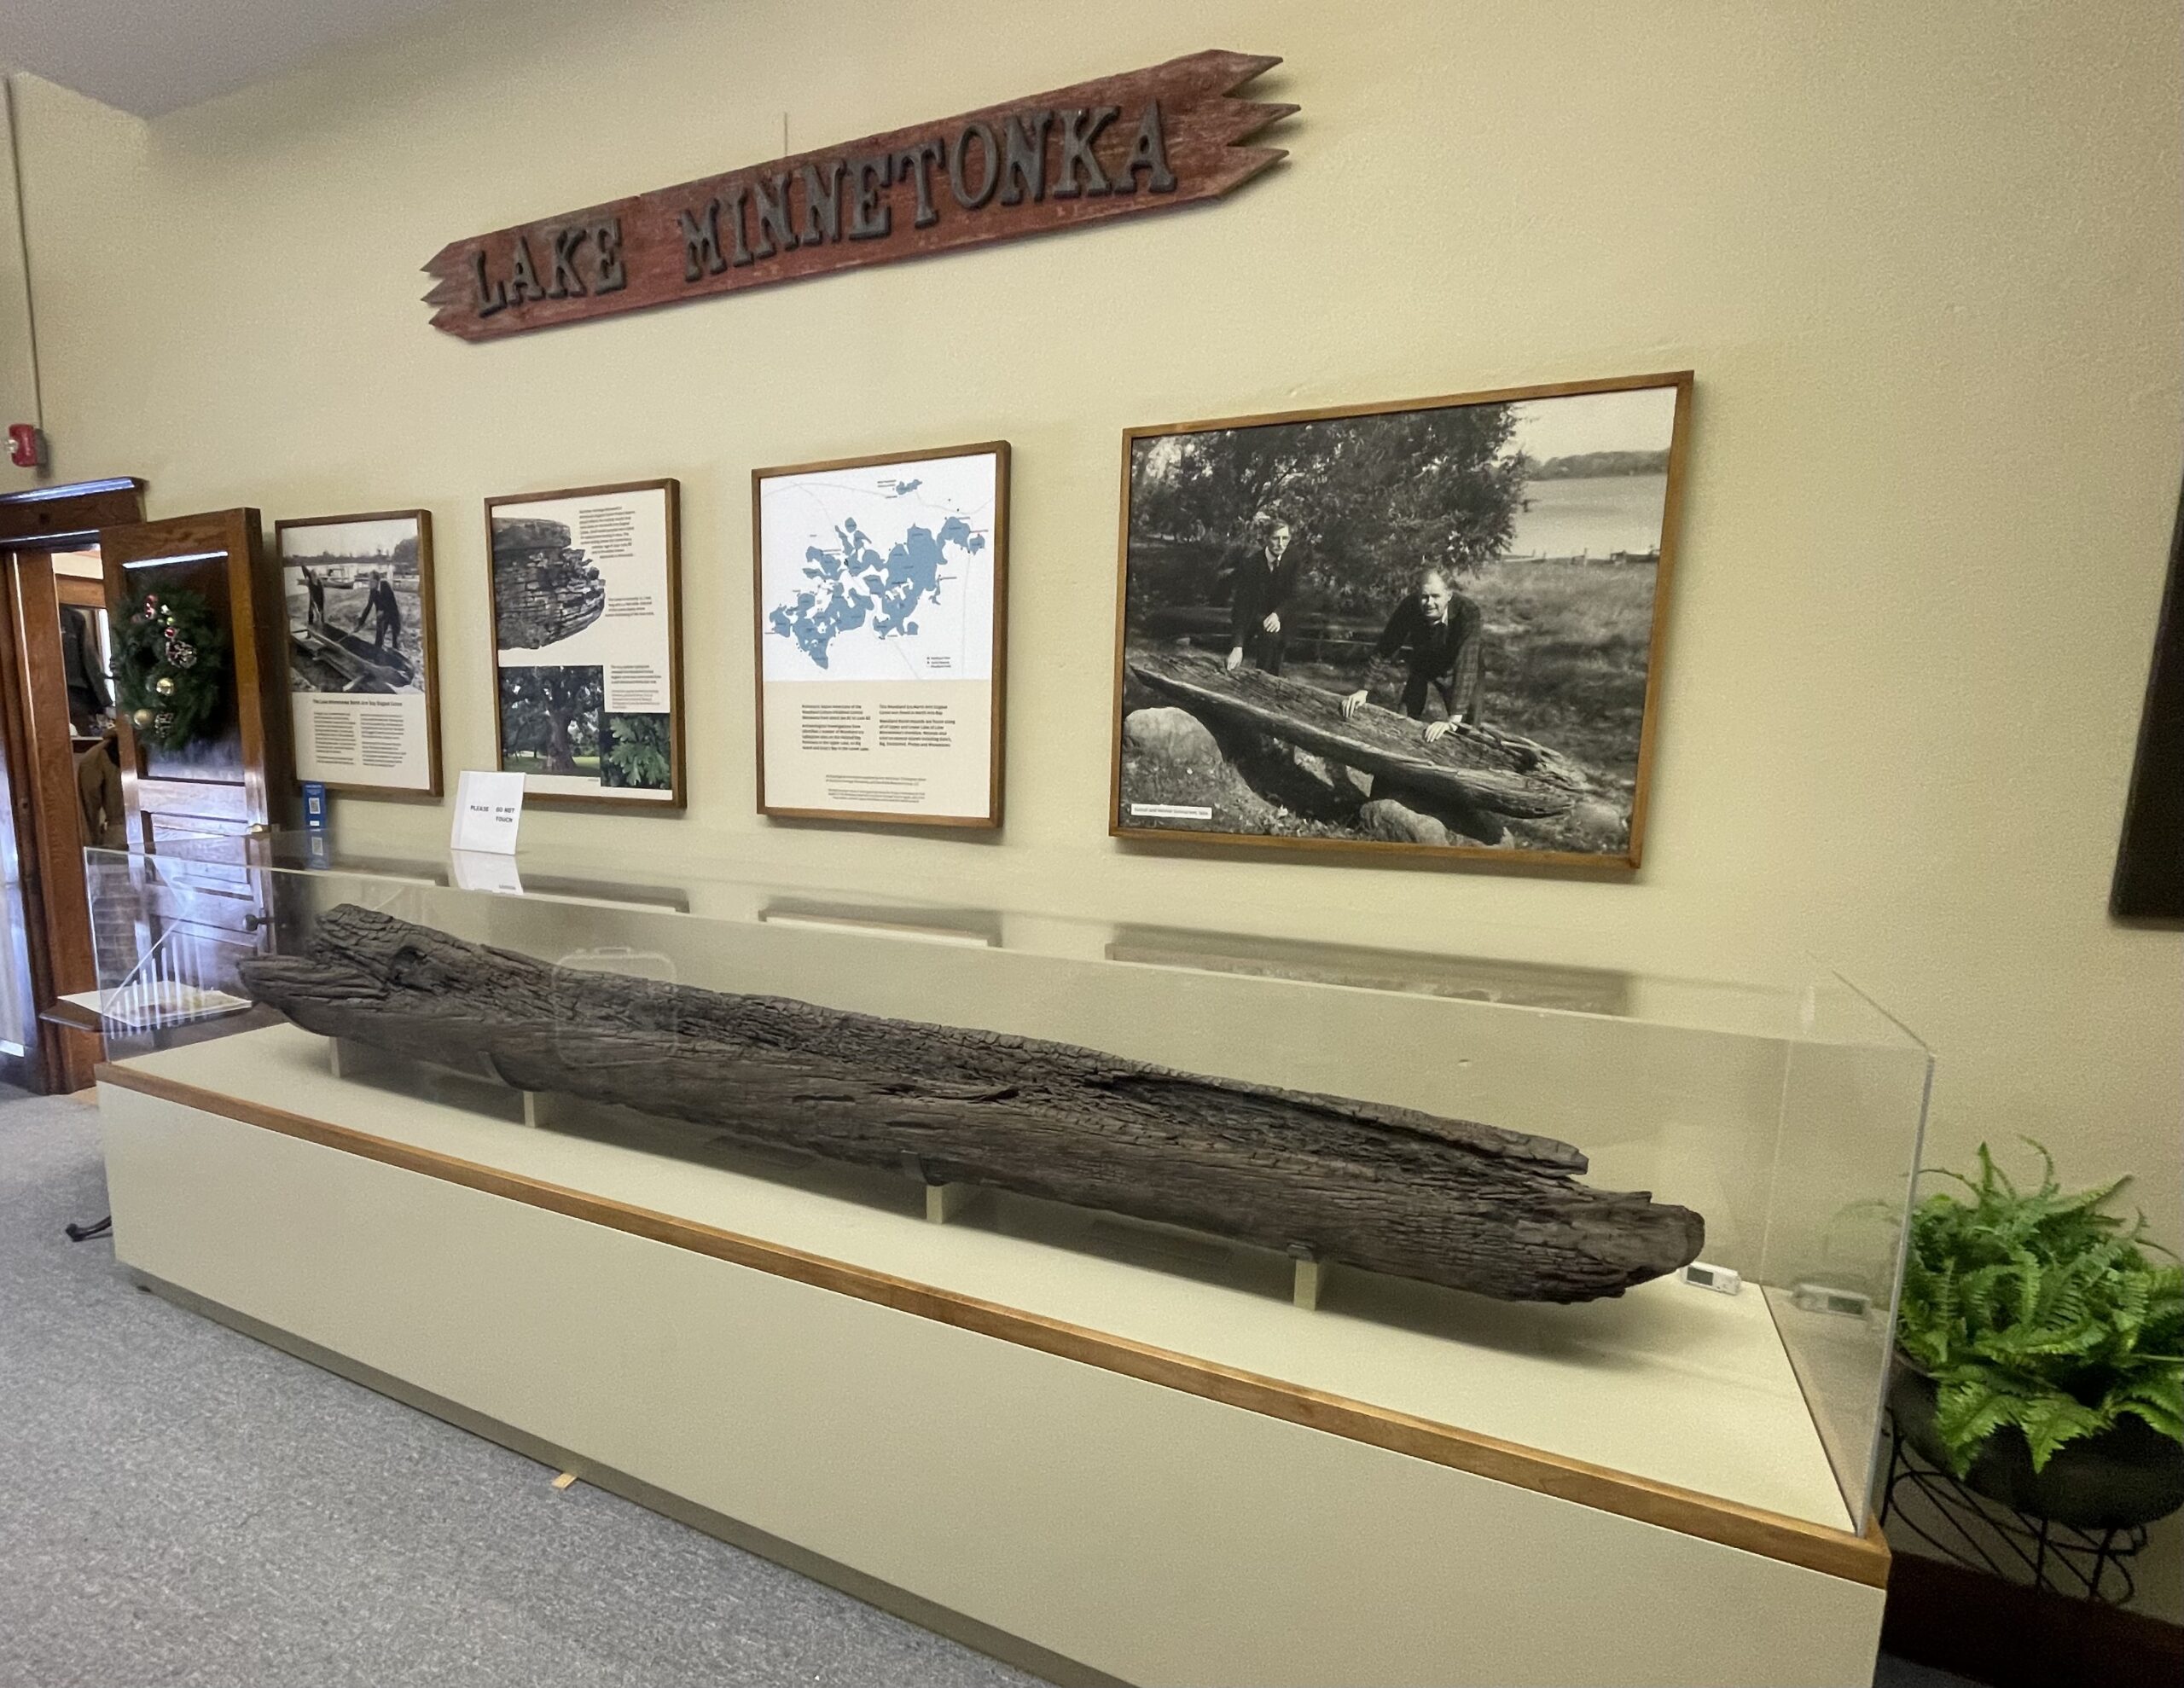 Dugout Canoe on Display at the West Hennepin History Center